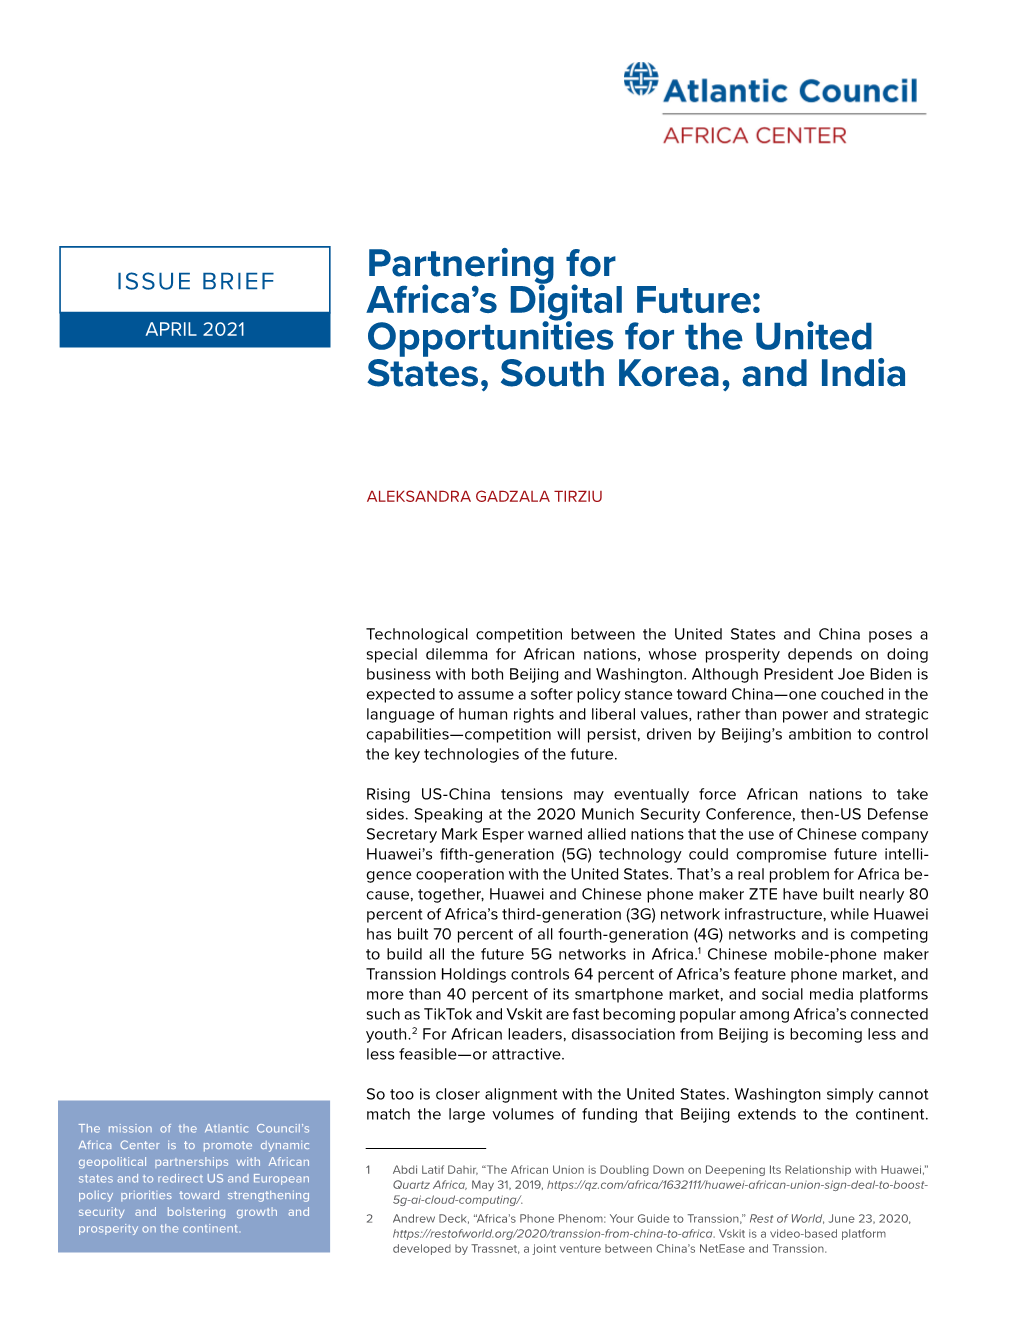 Partnering for Africa's Digital Future: Opportunities for the United States